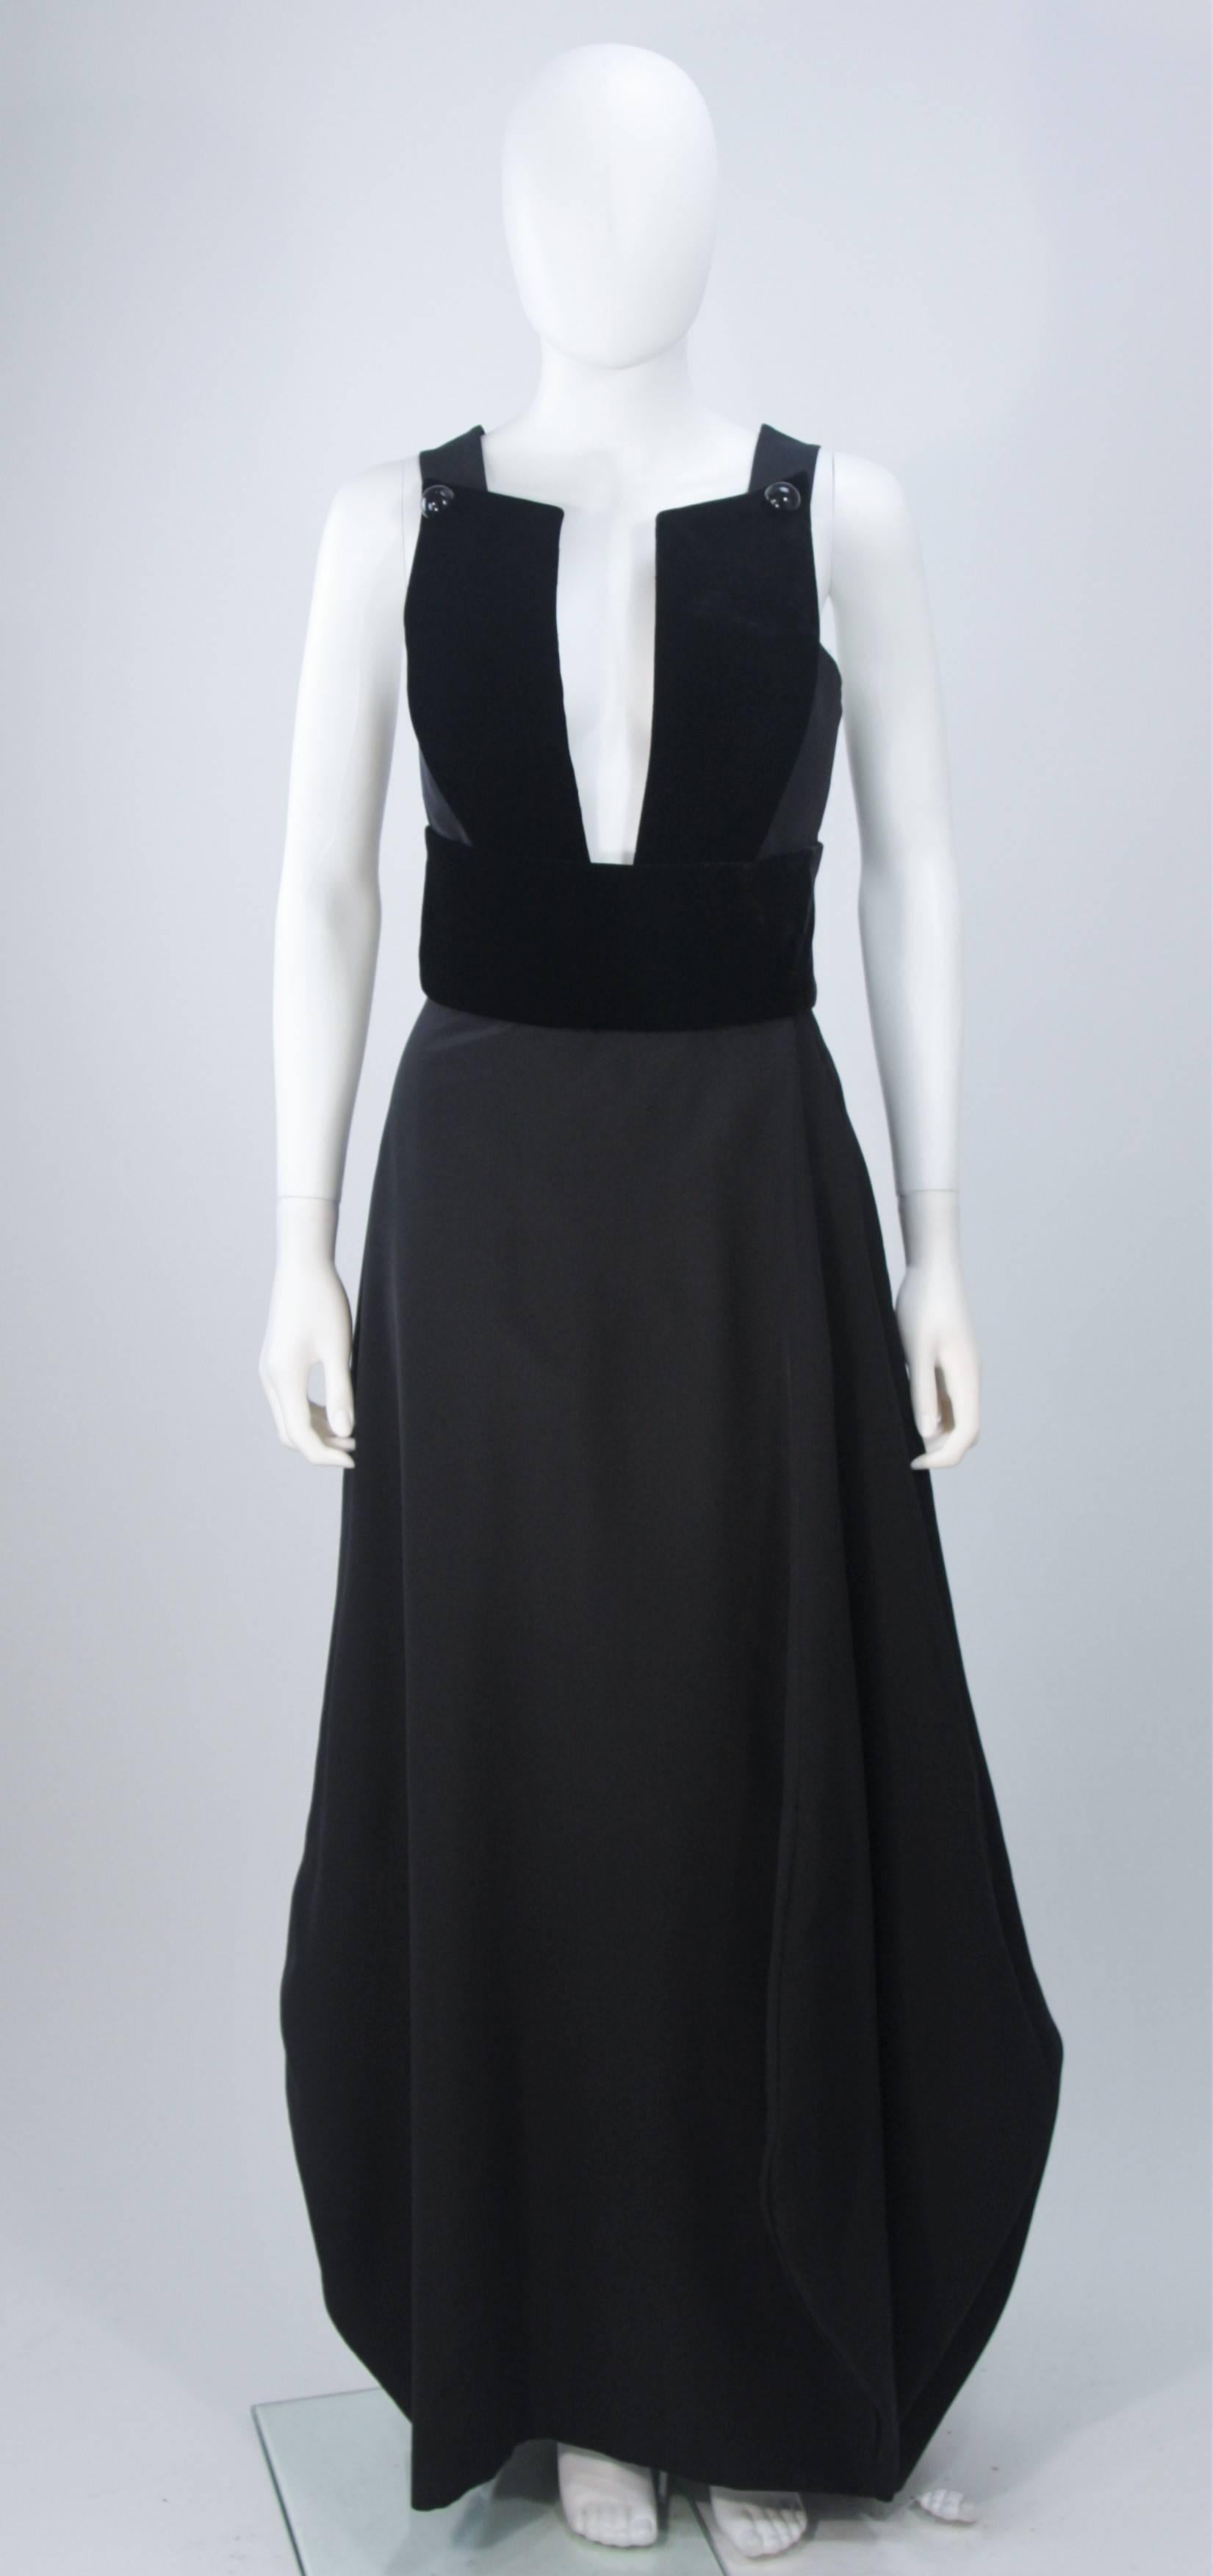  This Giorgio Armani design is available for viewing at our Beverly Hills Boutique. We offer a large selection of evening gowns and luxury garments. 

 This gown is composed of a black silk and velvet combination. Features a structured plunging